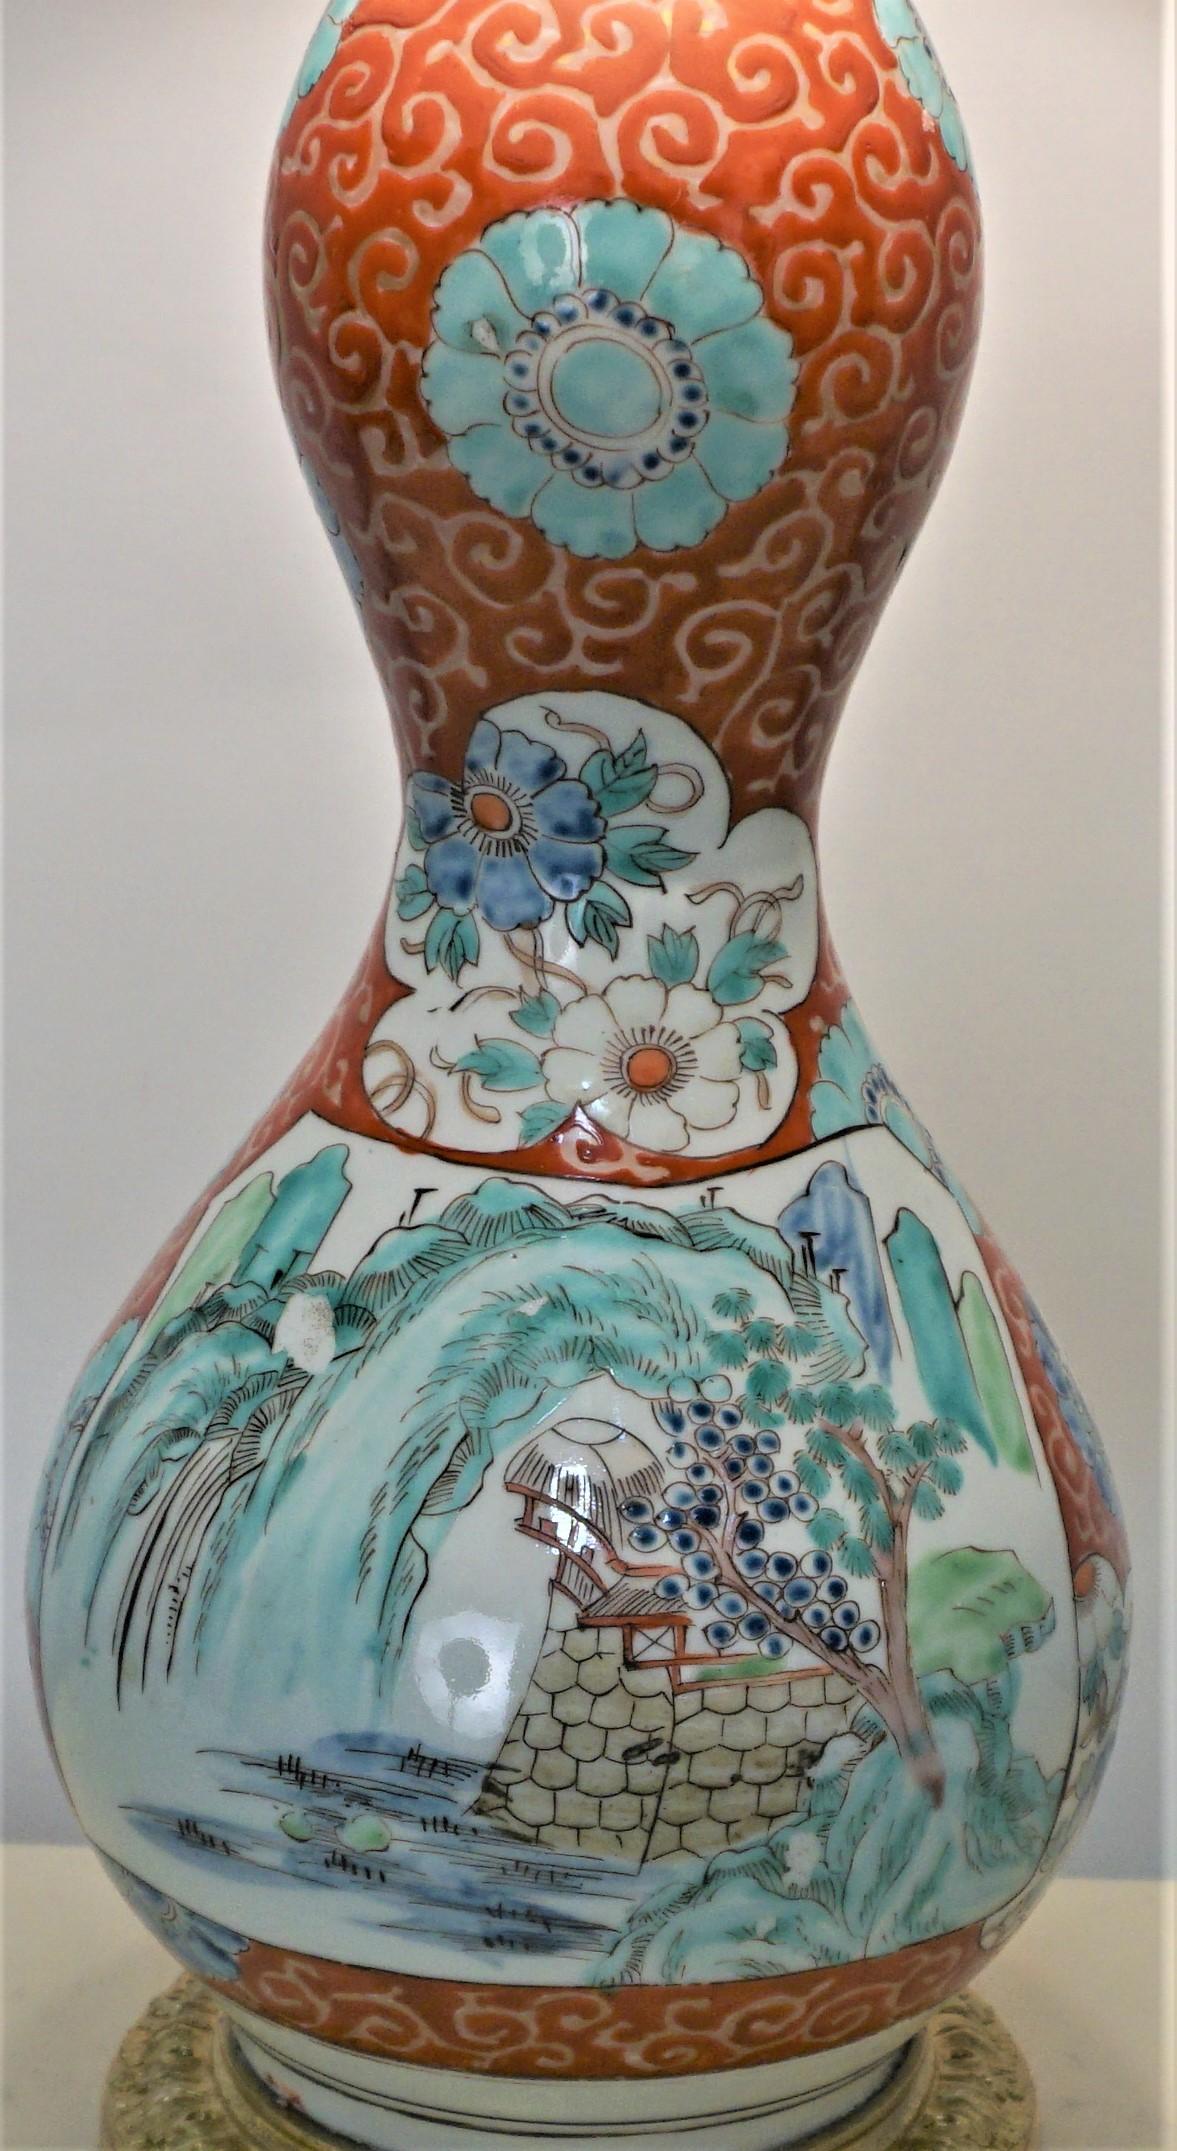 Customized Chinese porcelain vase to a table lamp with French bronze mounting.
Vase was made to a lamp in France.